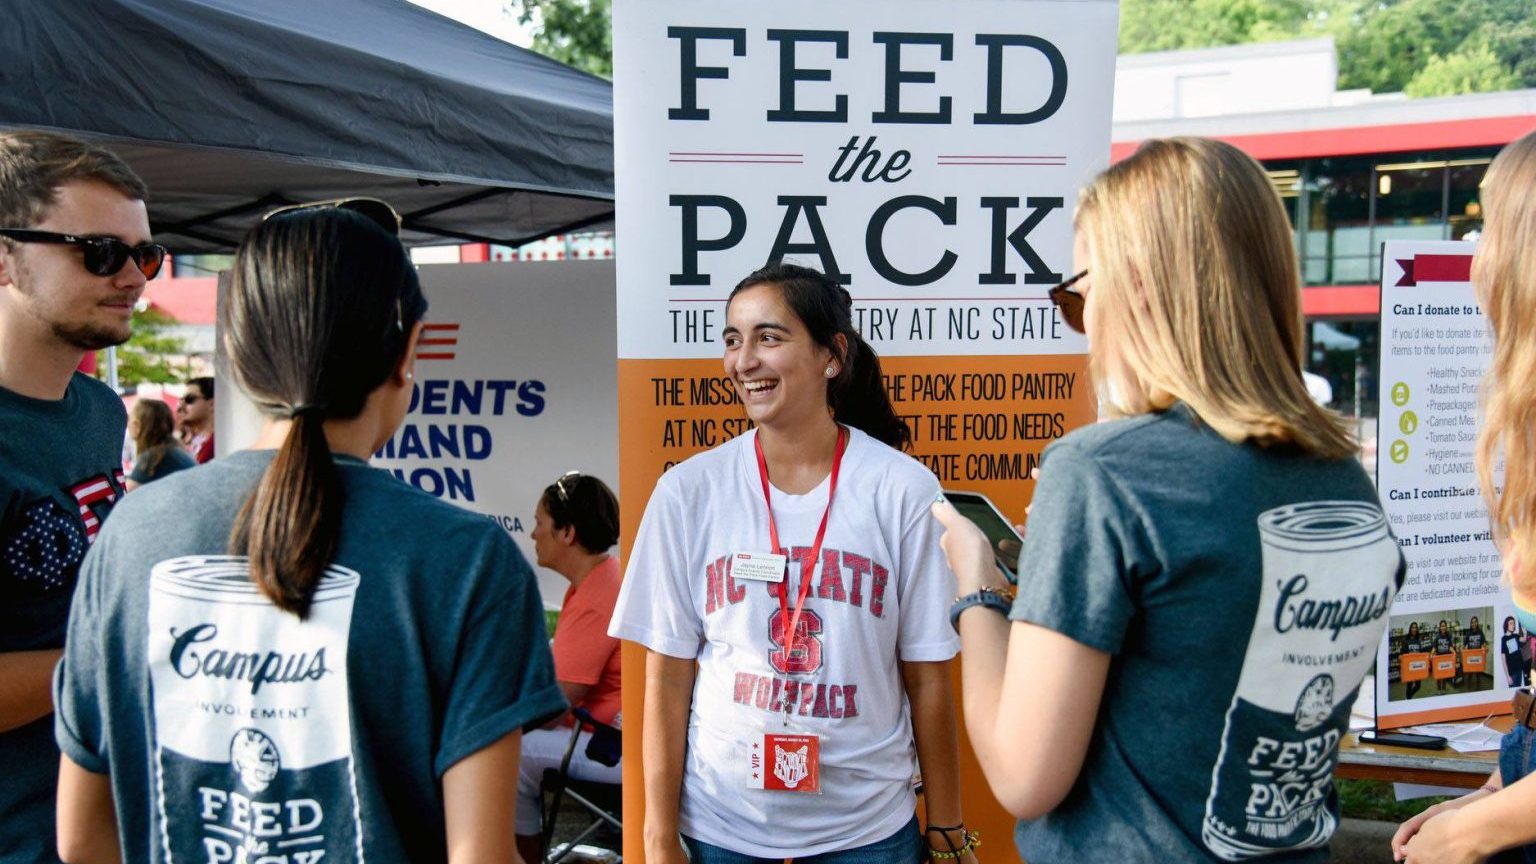 Jayna Lennon standing in front of a Feed the Pack sign